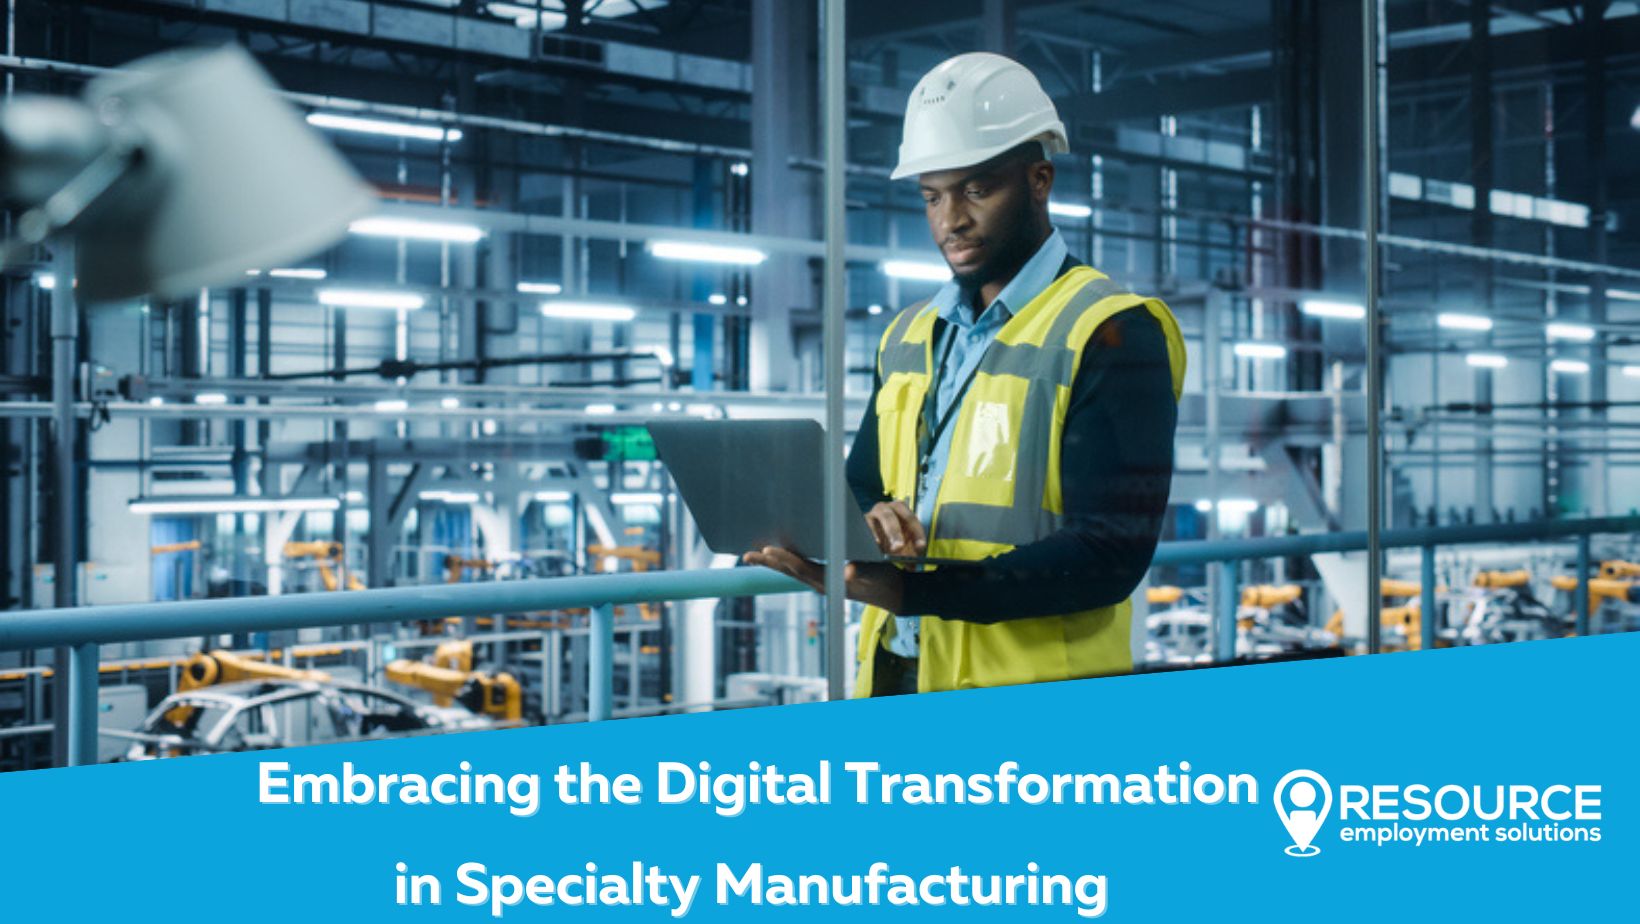 Embracing the Digital Transformation in Specialty Manufacturing with Resource Employment Solutions